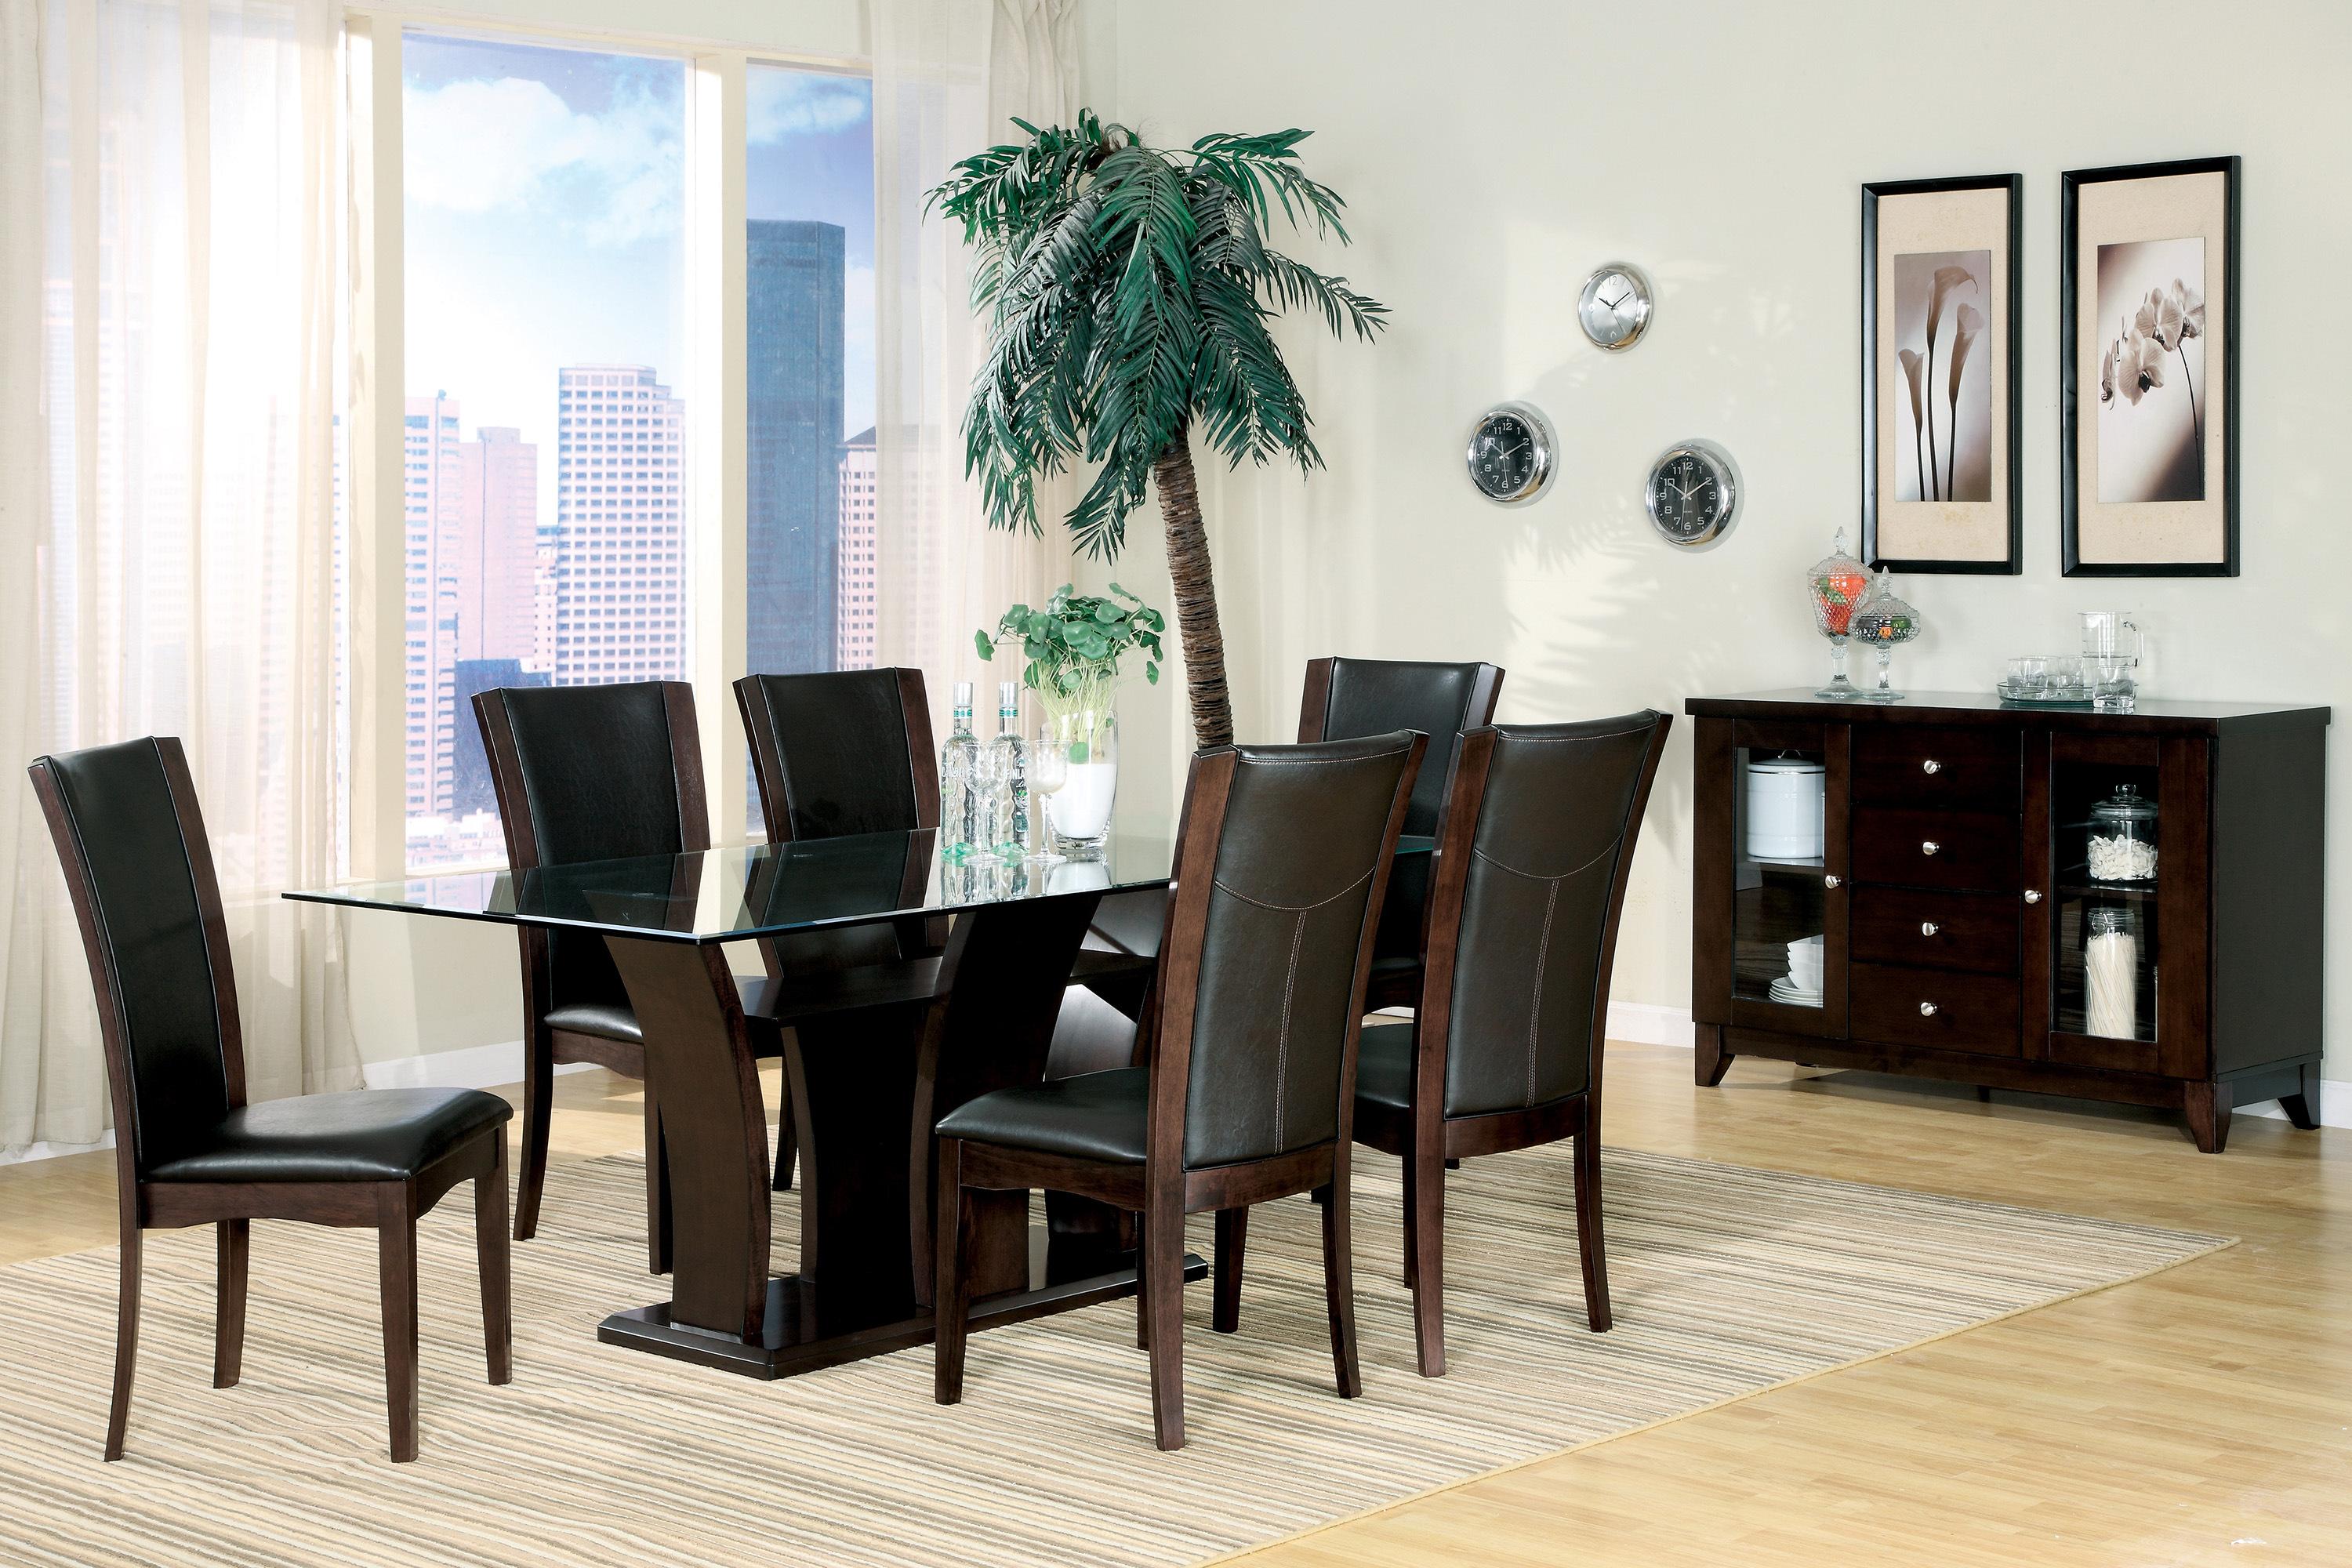 Contemporary Dining Room Set 710-72-5PC Daisy 710-72-5PC in Espresso, Brown Faux Leather